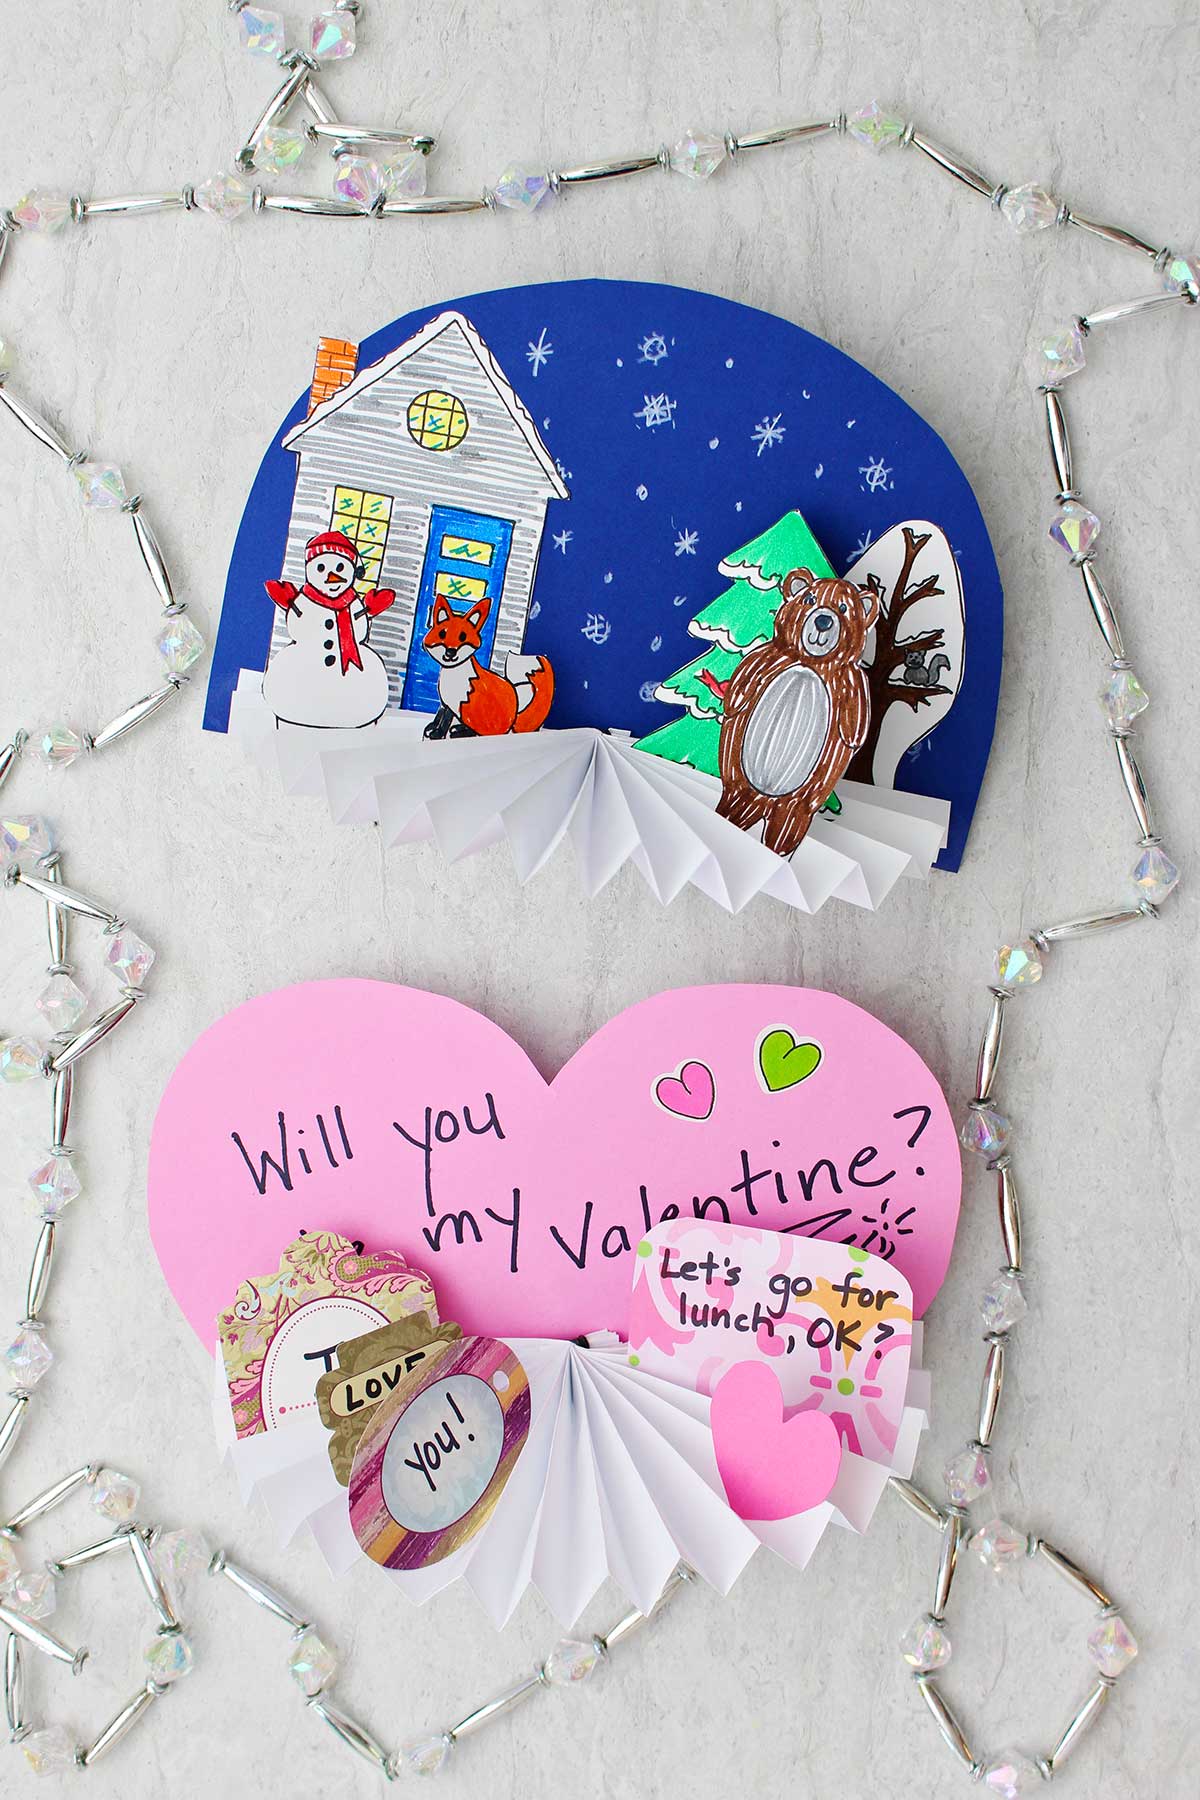 Two images of completed Paper Fan Crafts with beads around it. One with a winter theme and one with a Valentine's Day theme.